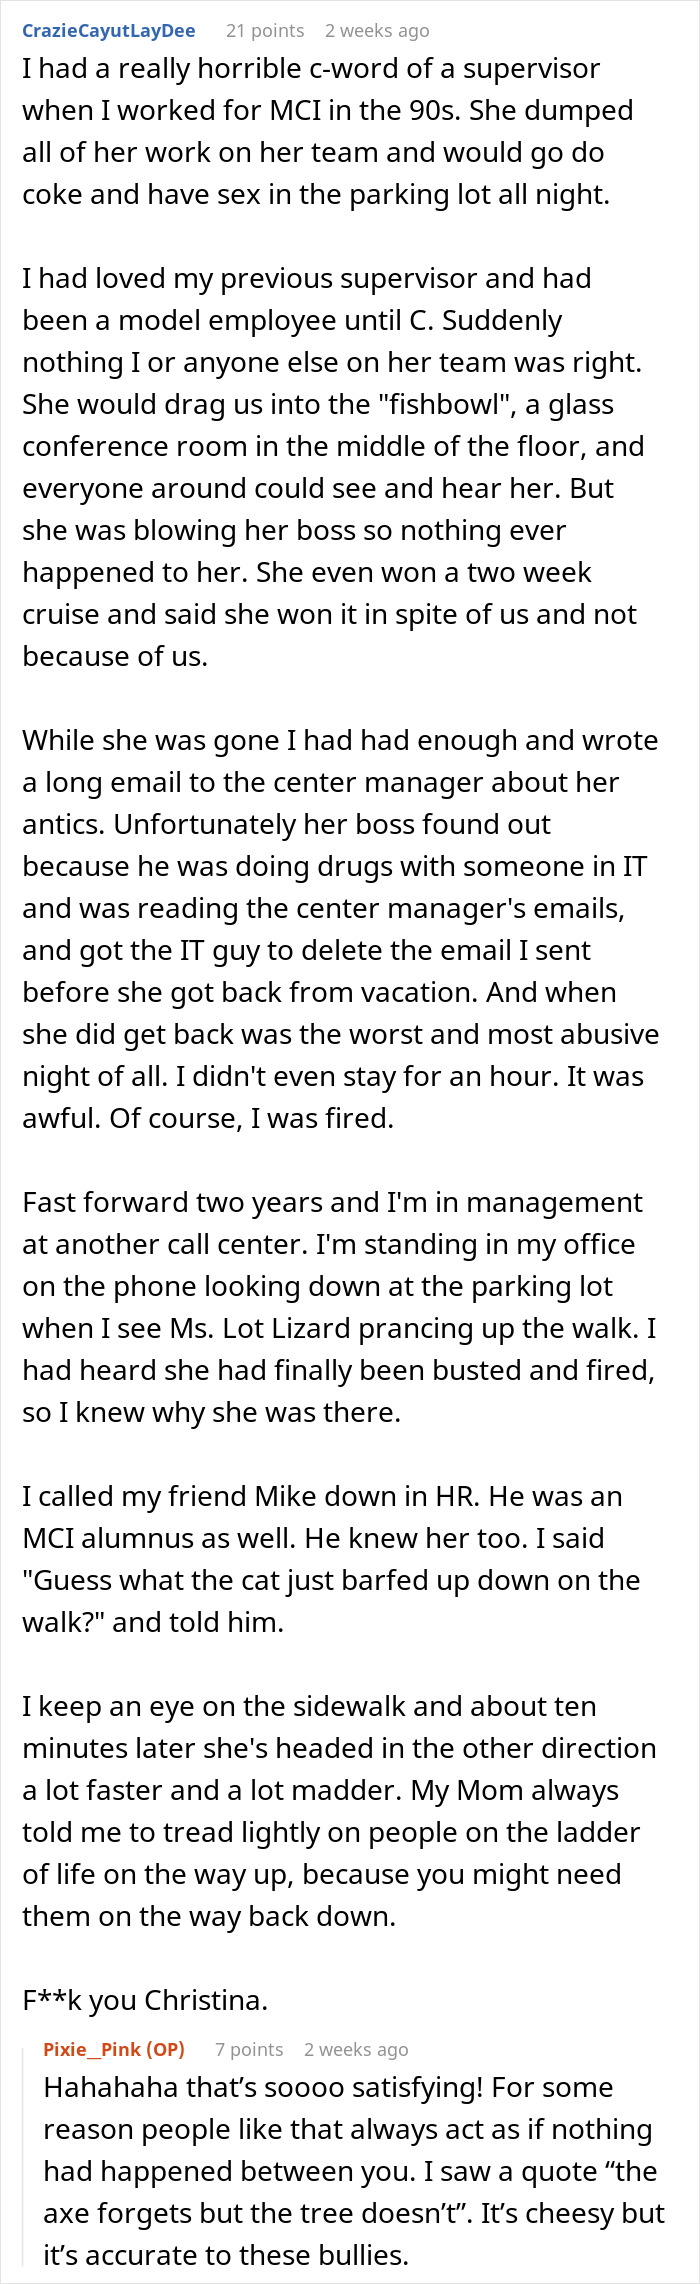 Employee Is Surprised Their Nasty Ex-Boss Attends A Job Interview At Their New Company, Does Their Best To Make Them Fail It